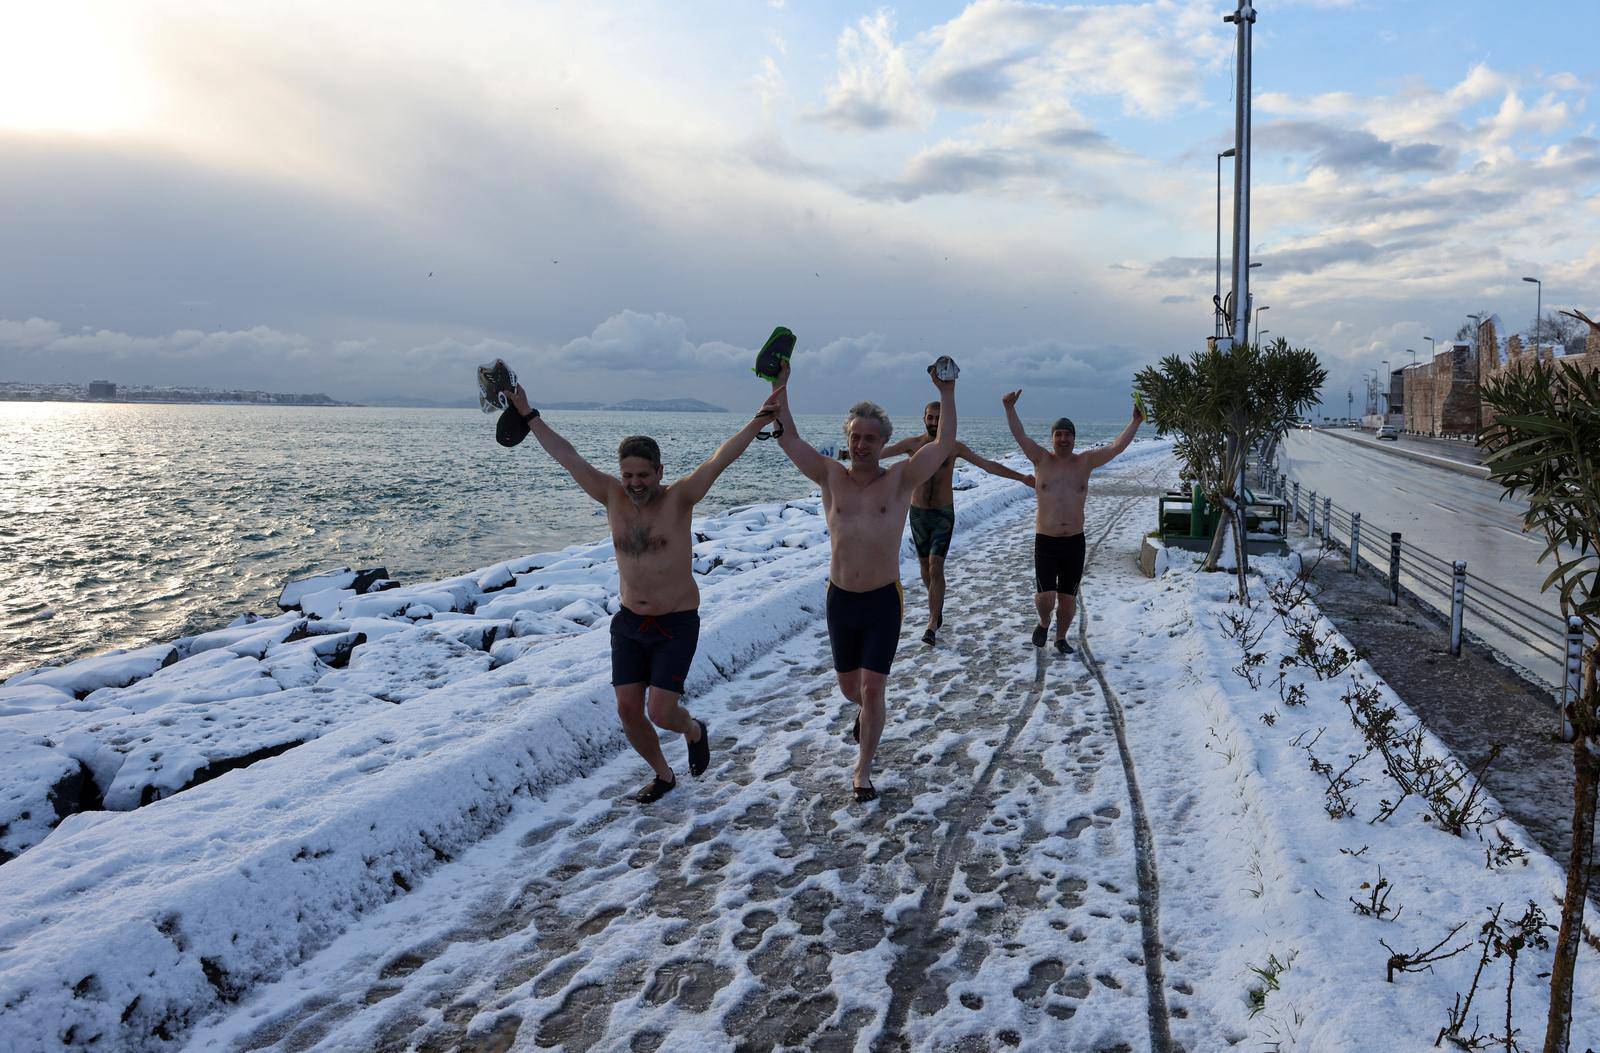 A group of swimmers run to warm-up before they dive into the chilly waters of the Bosphorus on a snowy day in Istanbul